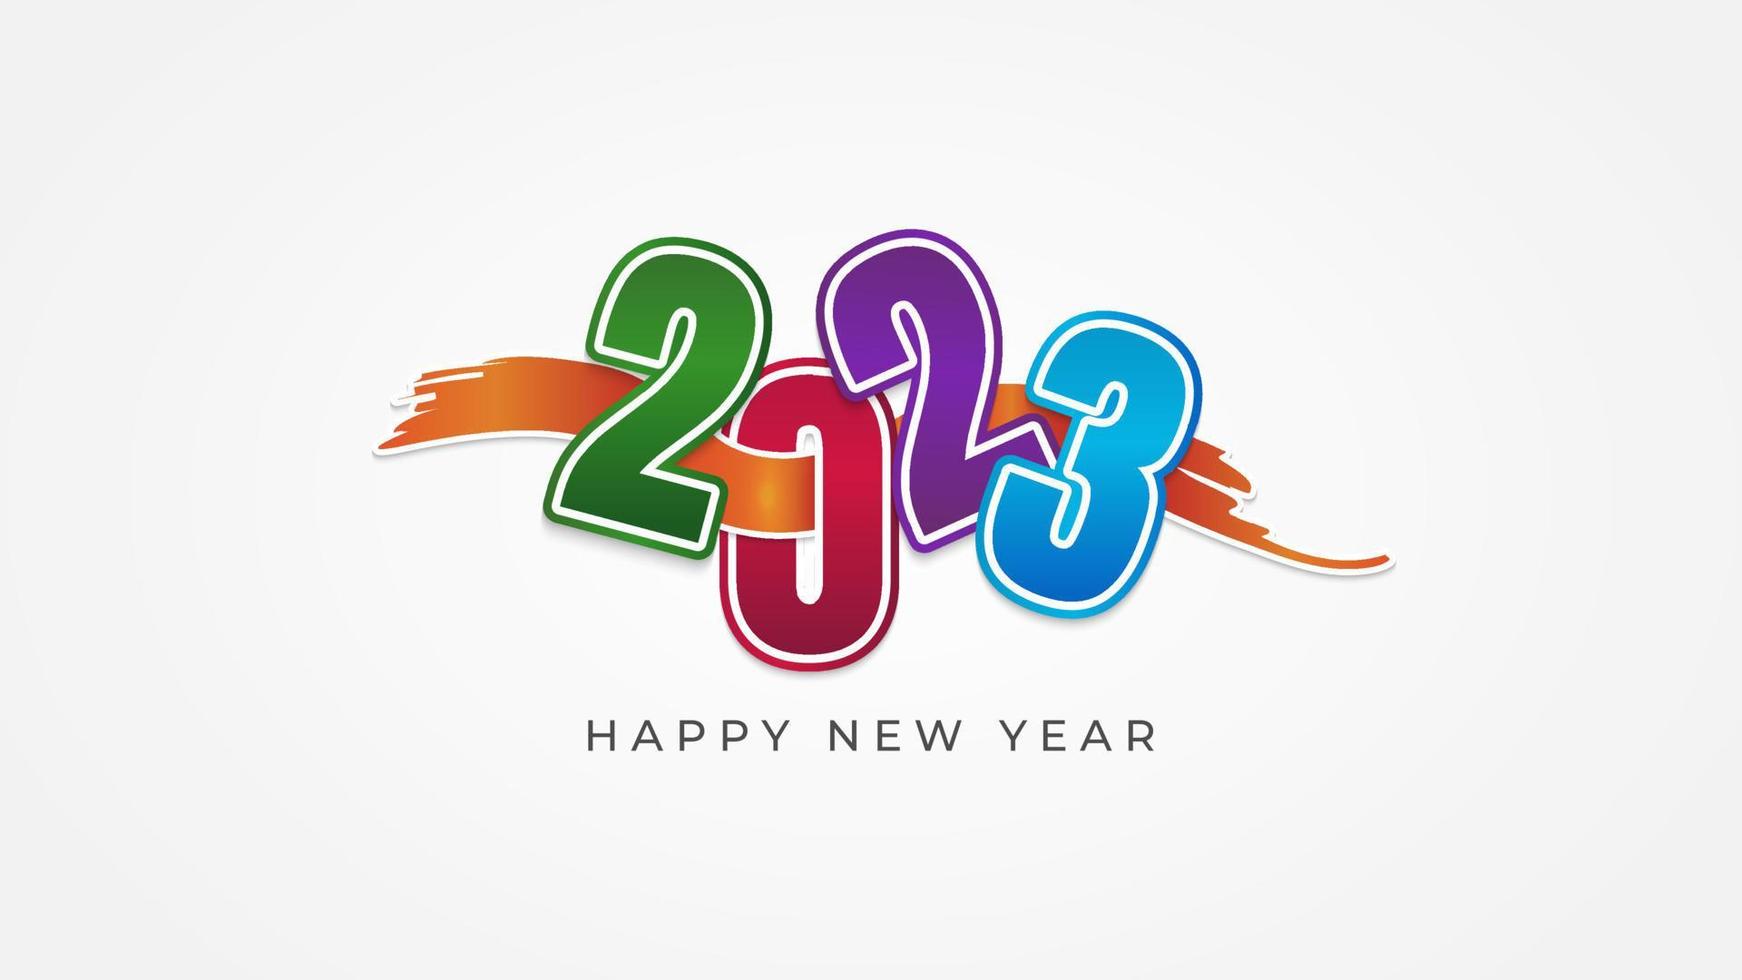 Paper cut style happy new year 2023 greeting with ribbon vector